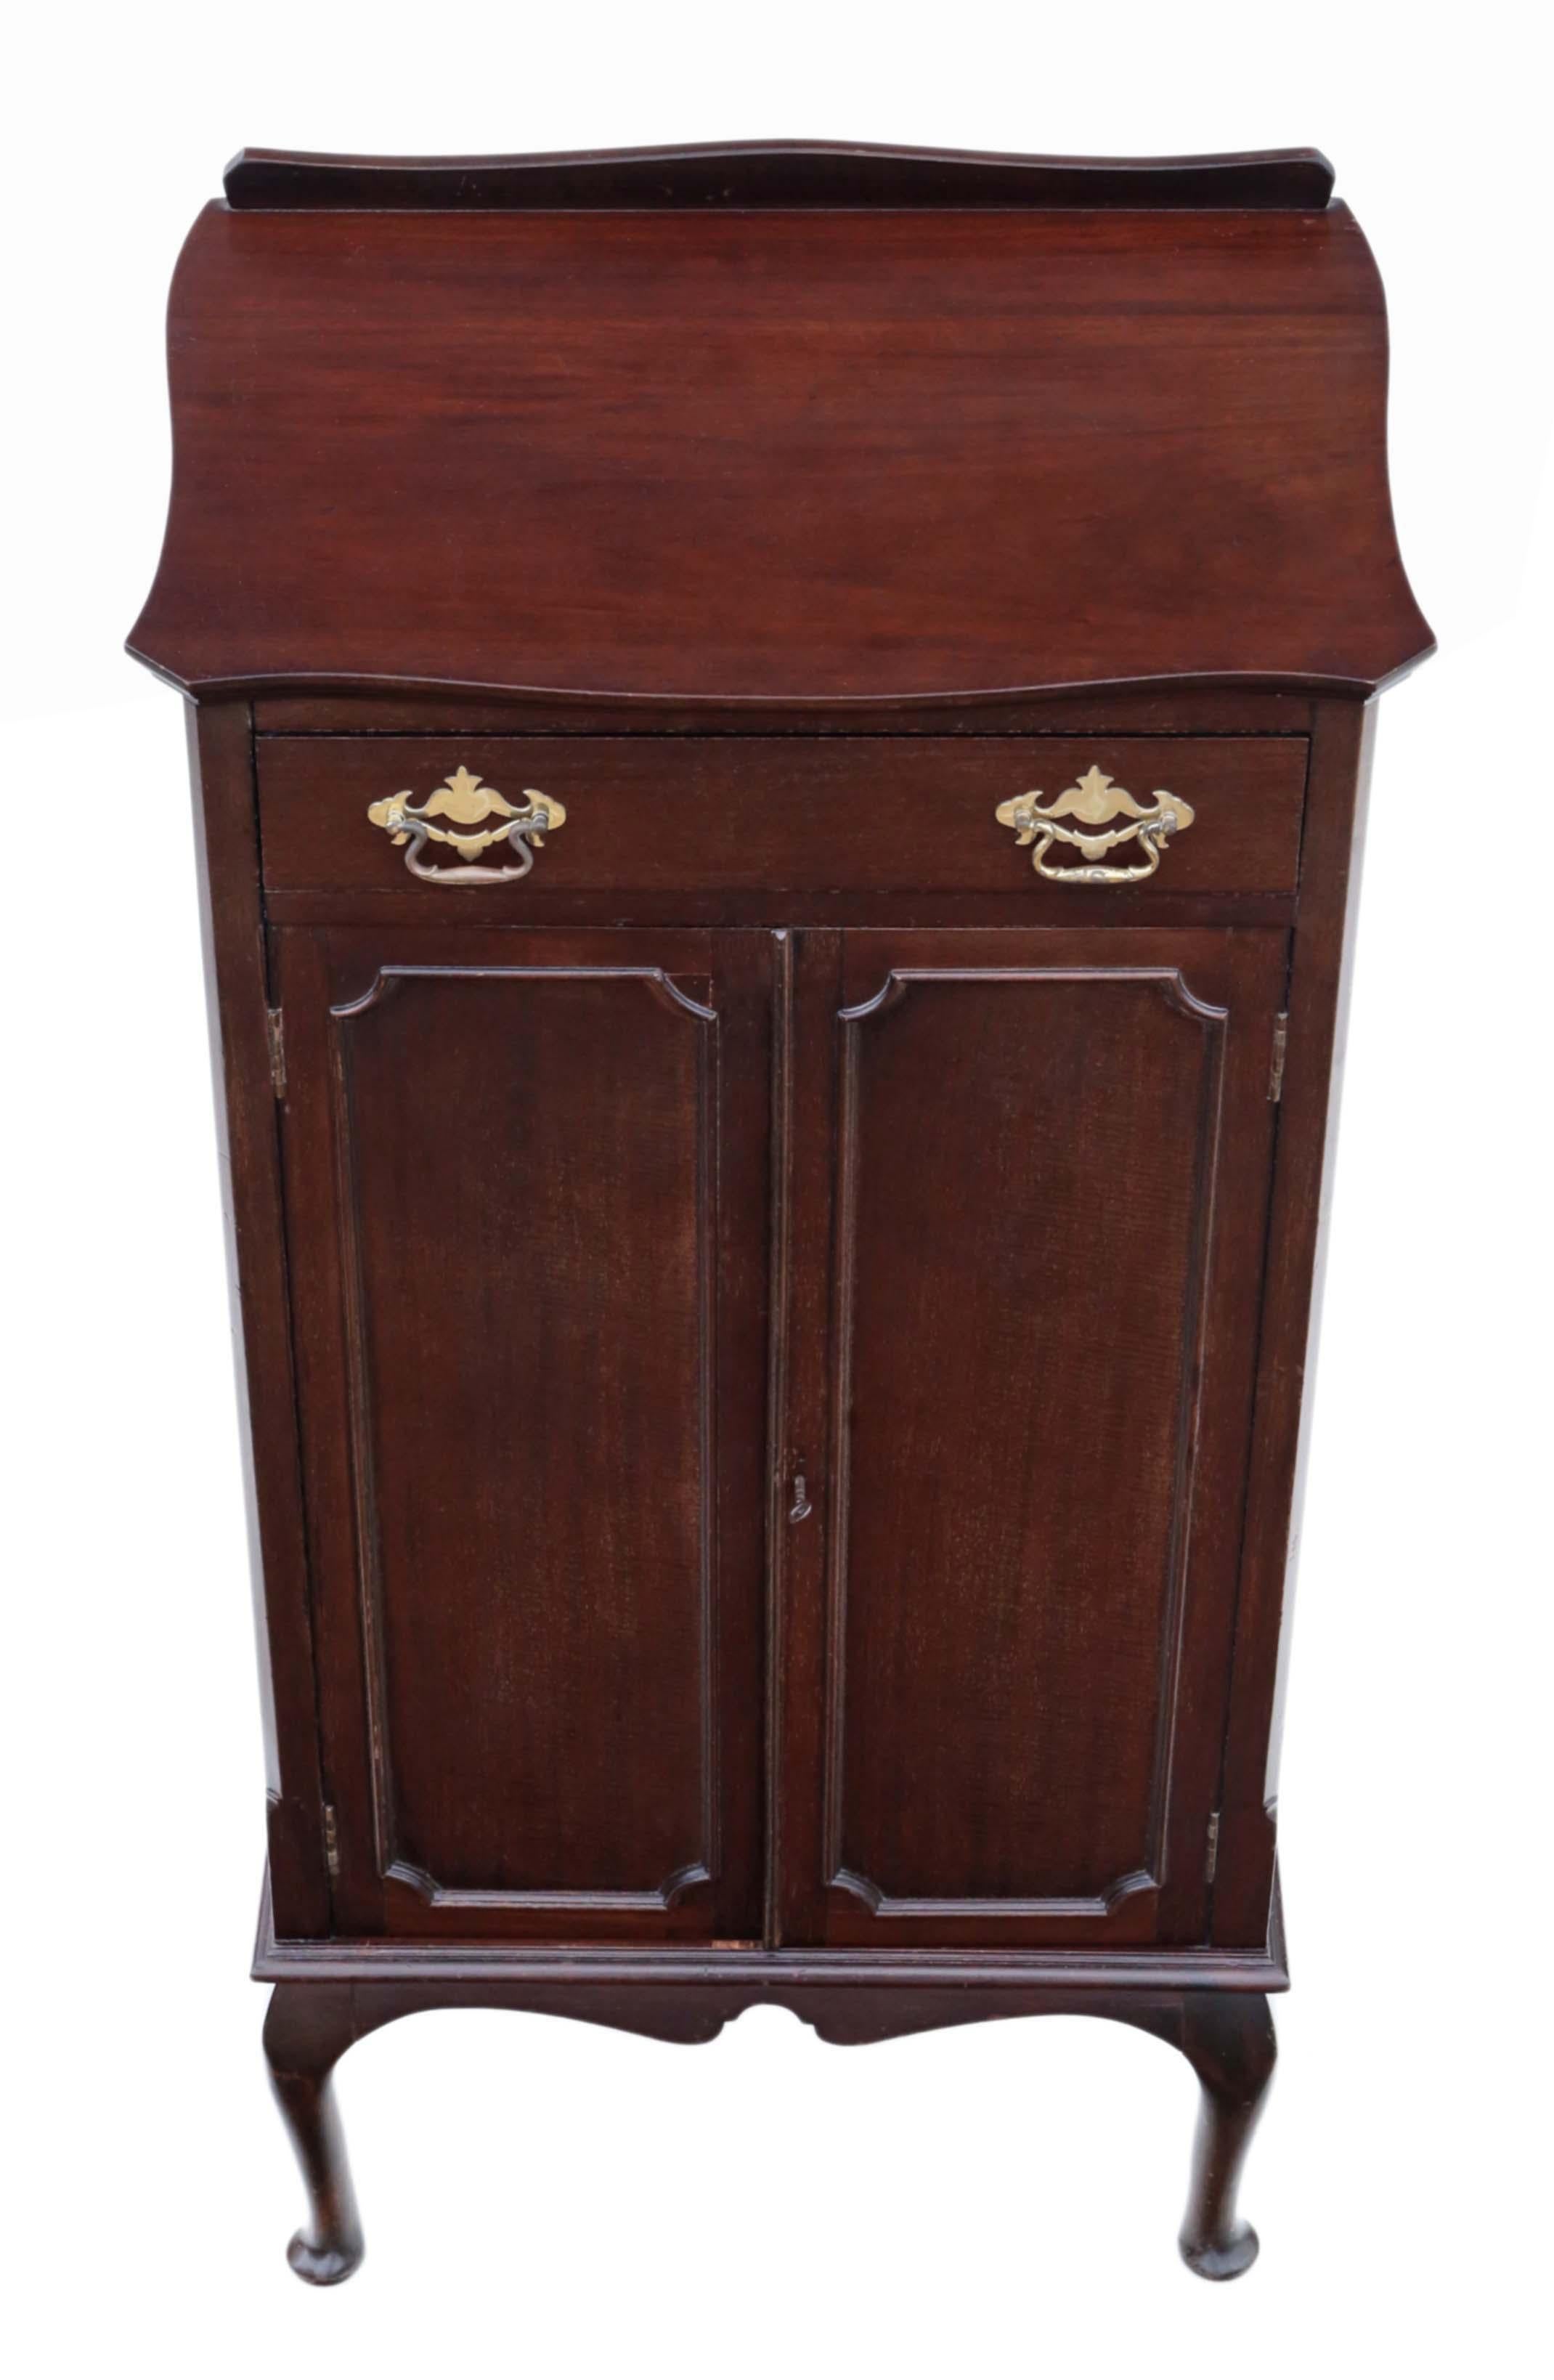 Antique Edwardian C1910 mahogany music cabinet cupboard.

This is a lovely item, that is full of age, charm and character. Traditional top drawer with a drop down front (for sheet music).

Solid, with no loose joints or wobbles.

Would look